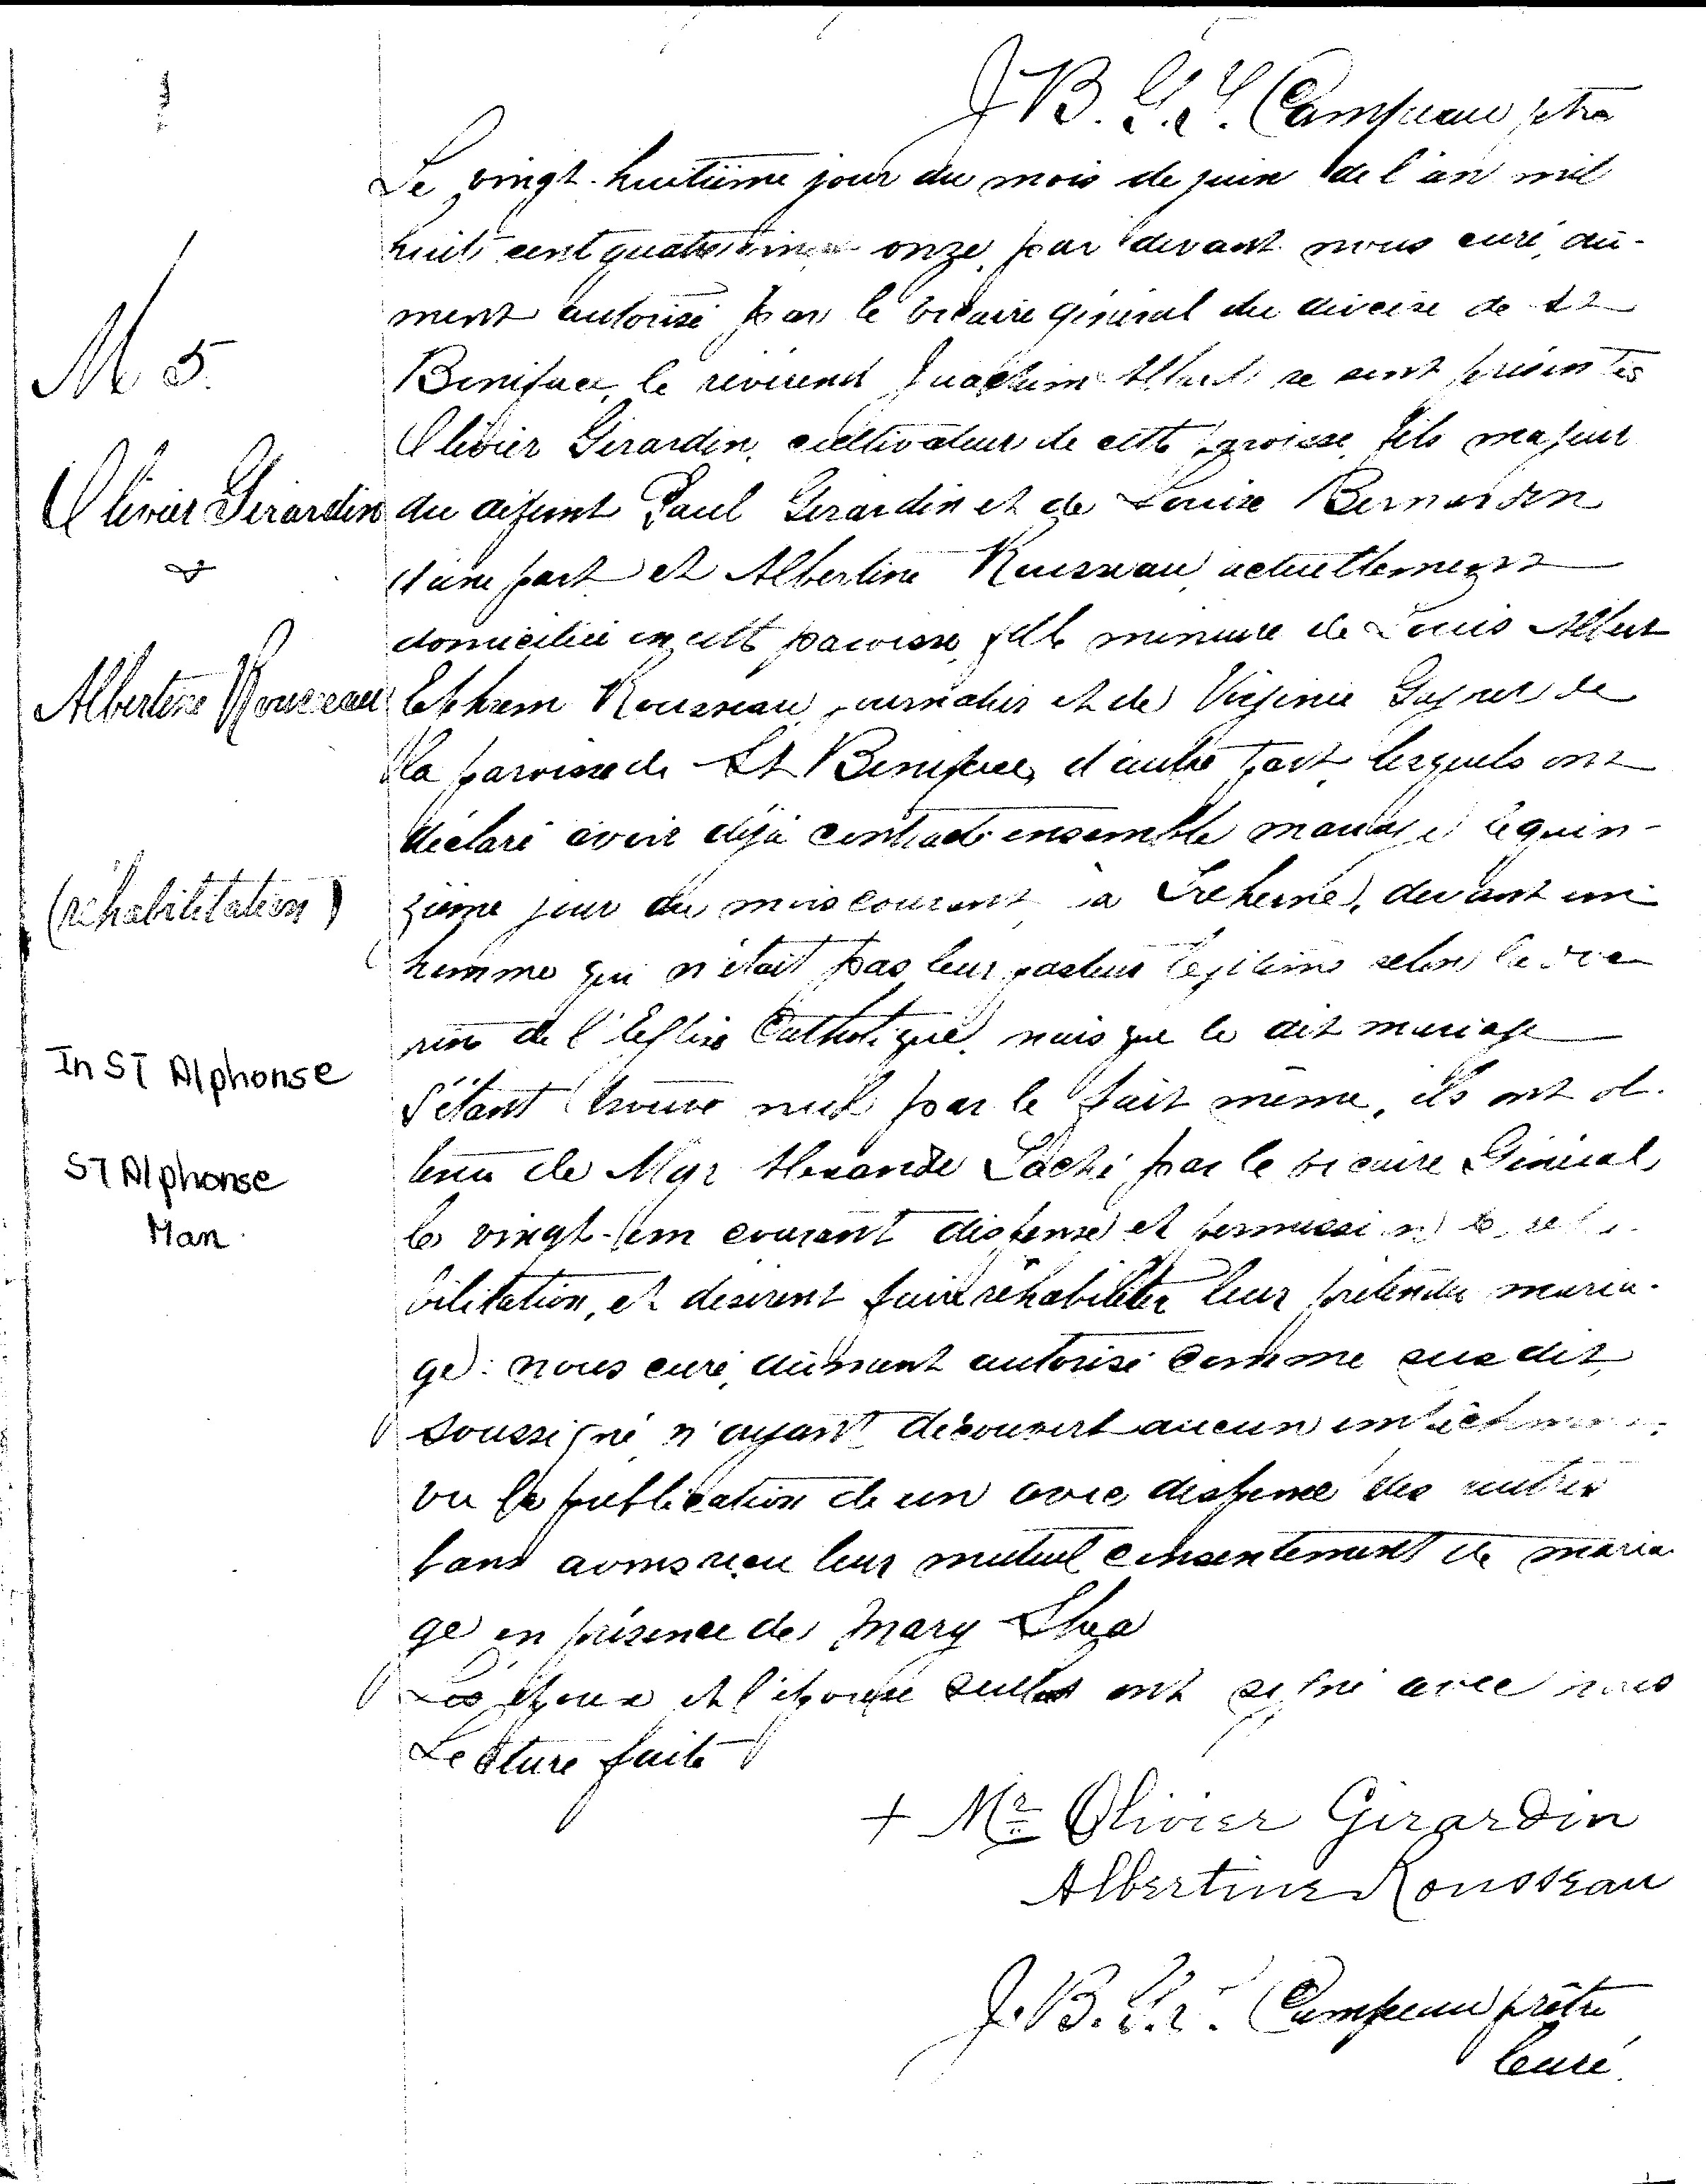 Church Marriage Record for Albertine Rousseau and Olivier Girardin 